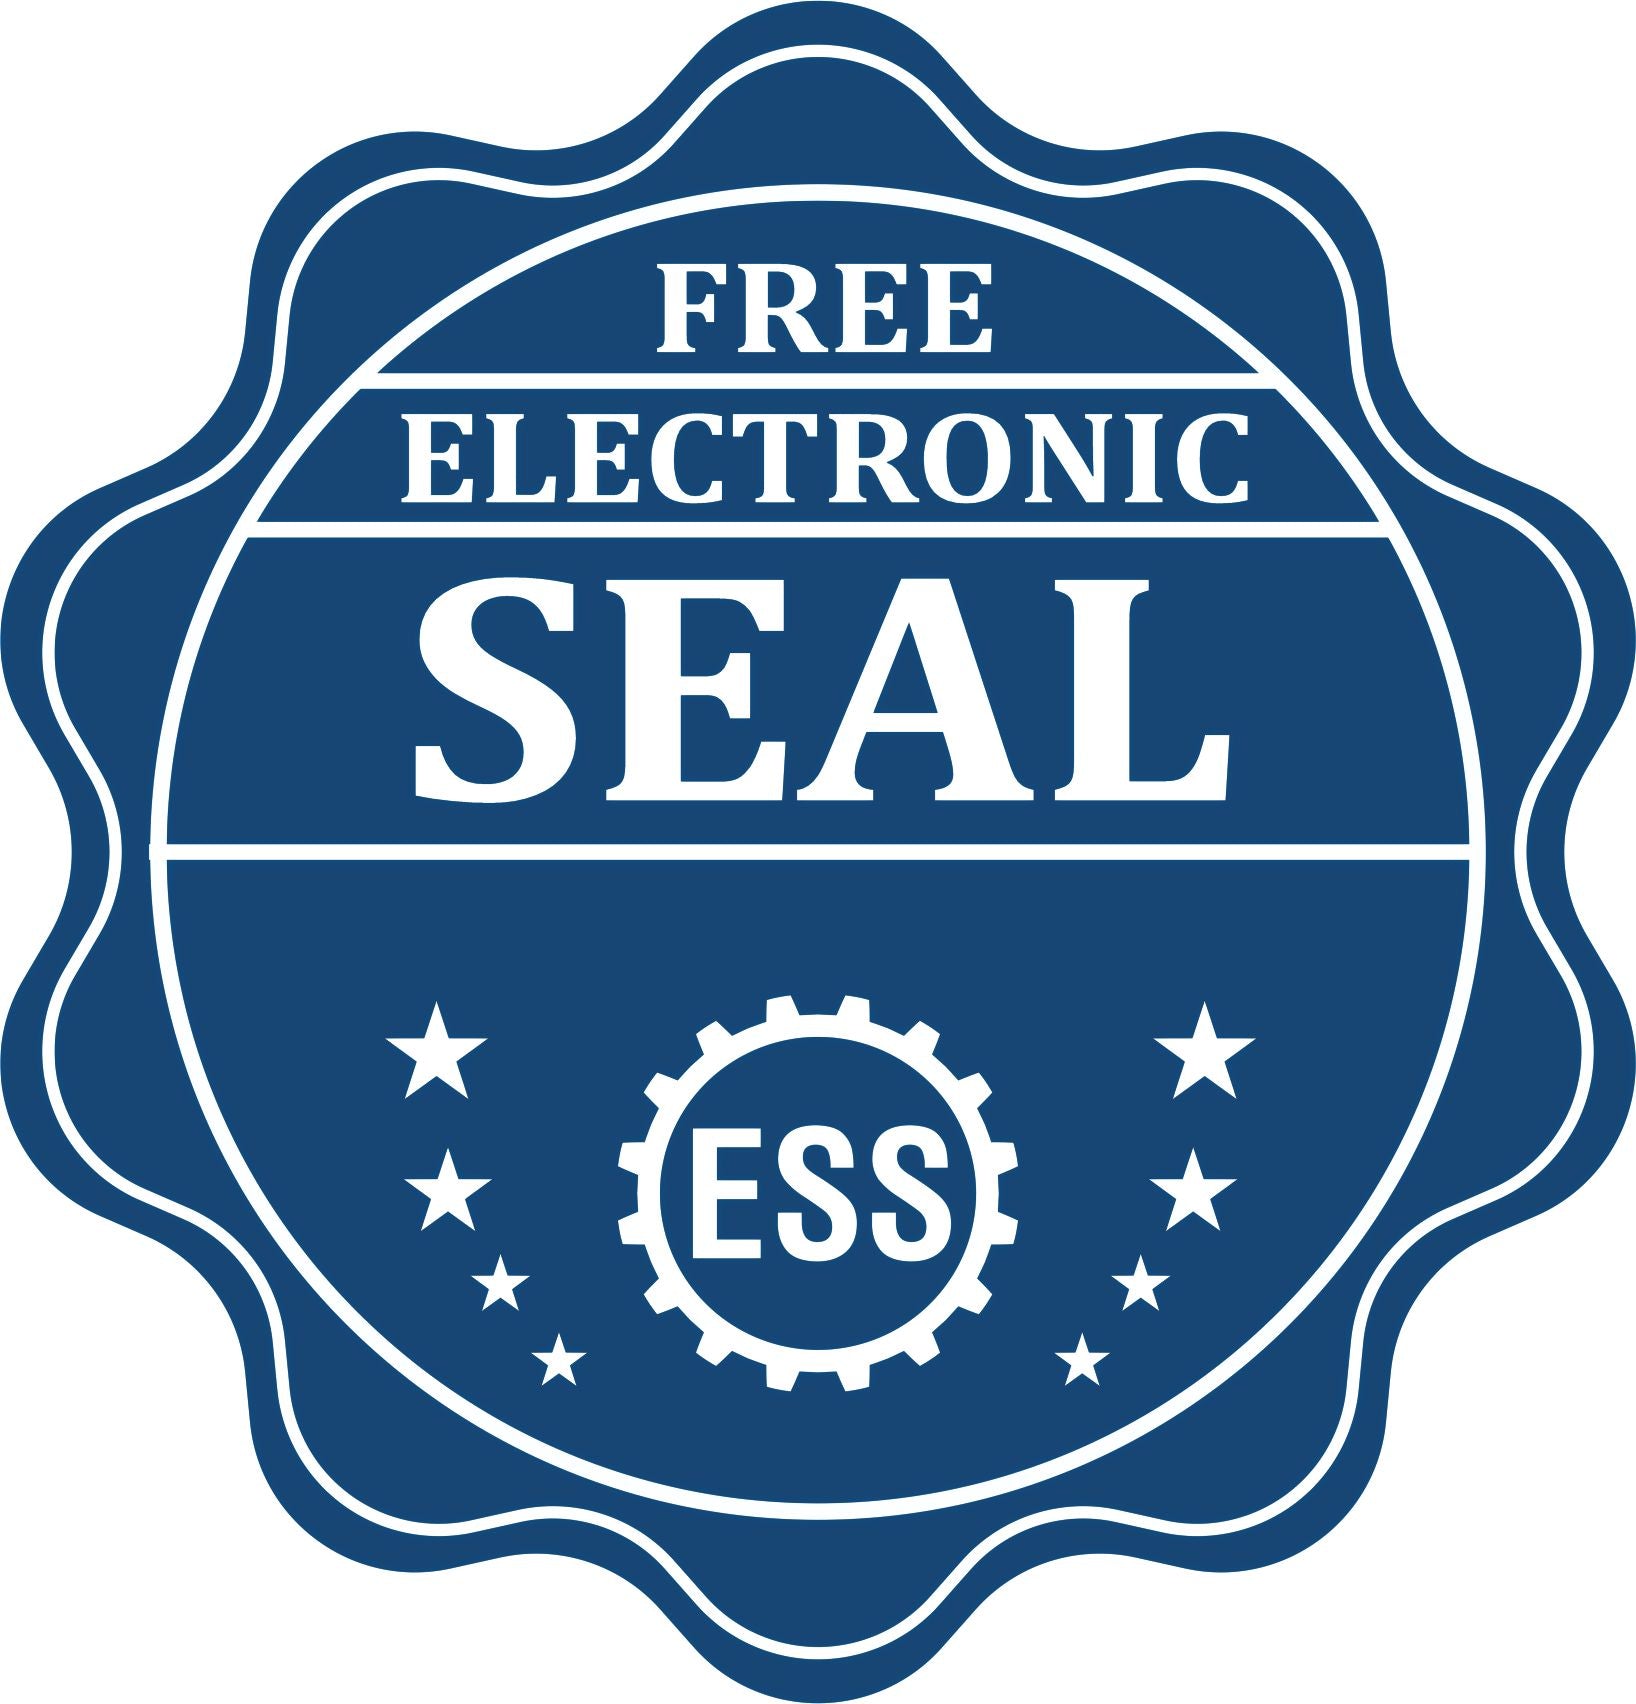 A badge showing a free electronic seal for the Heavy Duty Cast Iron Pennsylvania Architect Embosser with stars and the ESS gear on the emblem.